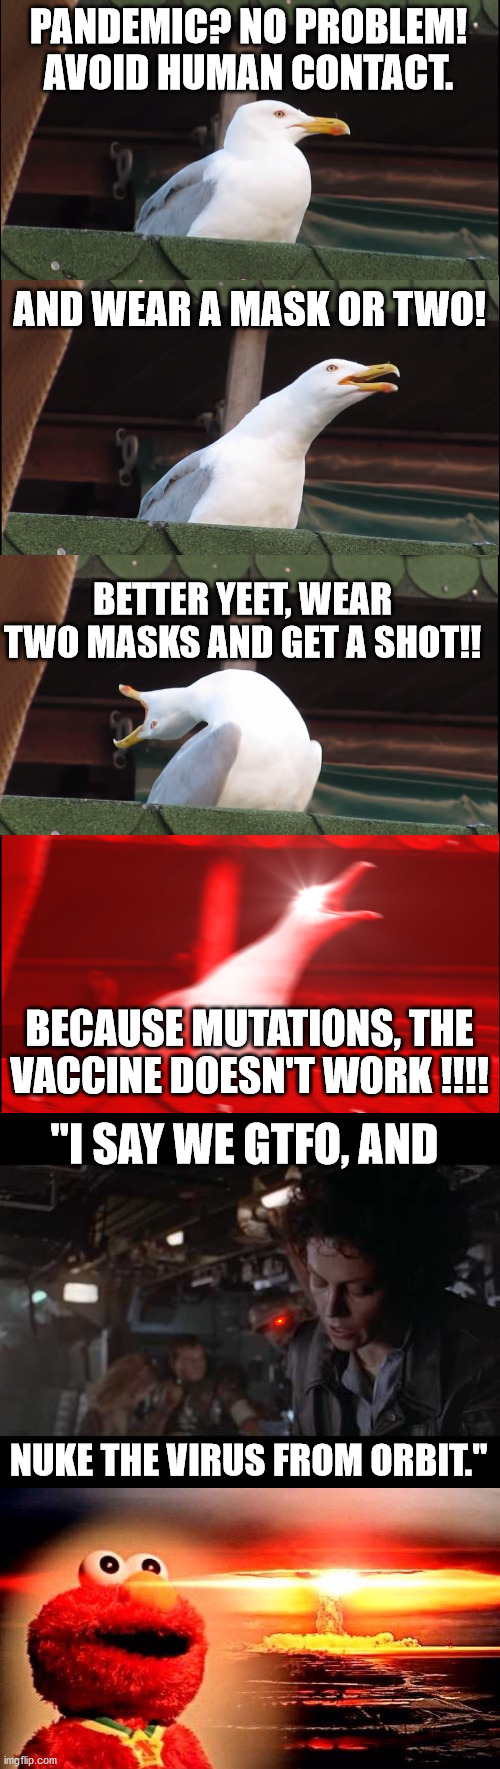 Seagull Says, | PANDEMIC? NO PROBLEM! AVOID HUMAN CONTACT. AND WEAR A MASK OR TWO! BETTER YEET, WEAR TWO MASKS AND GET A SHOT!! BECAUSE MUTATIONS, THE VACCINE DOESN'T WORK !!!! "I SAY WE GTFO, AND; NUKE THE VIRUS FROM ORBIT." | image tagged in memes,inhaling seagull,aliens-ellen ripley-nuke the entire site from orbit,elmo nuclear explosion,covid-19,coronavirus meme | made w/ Imgflip meme maker